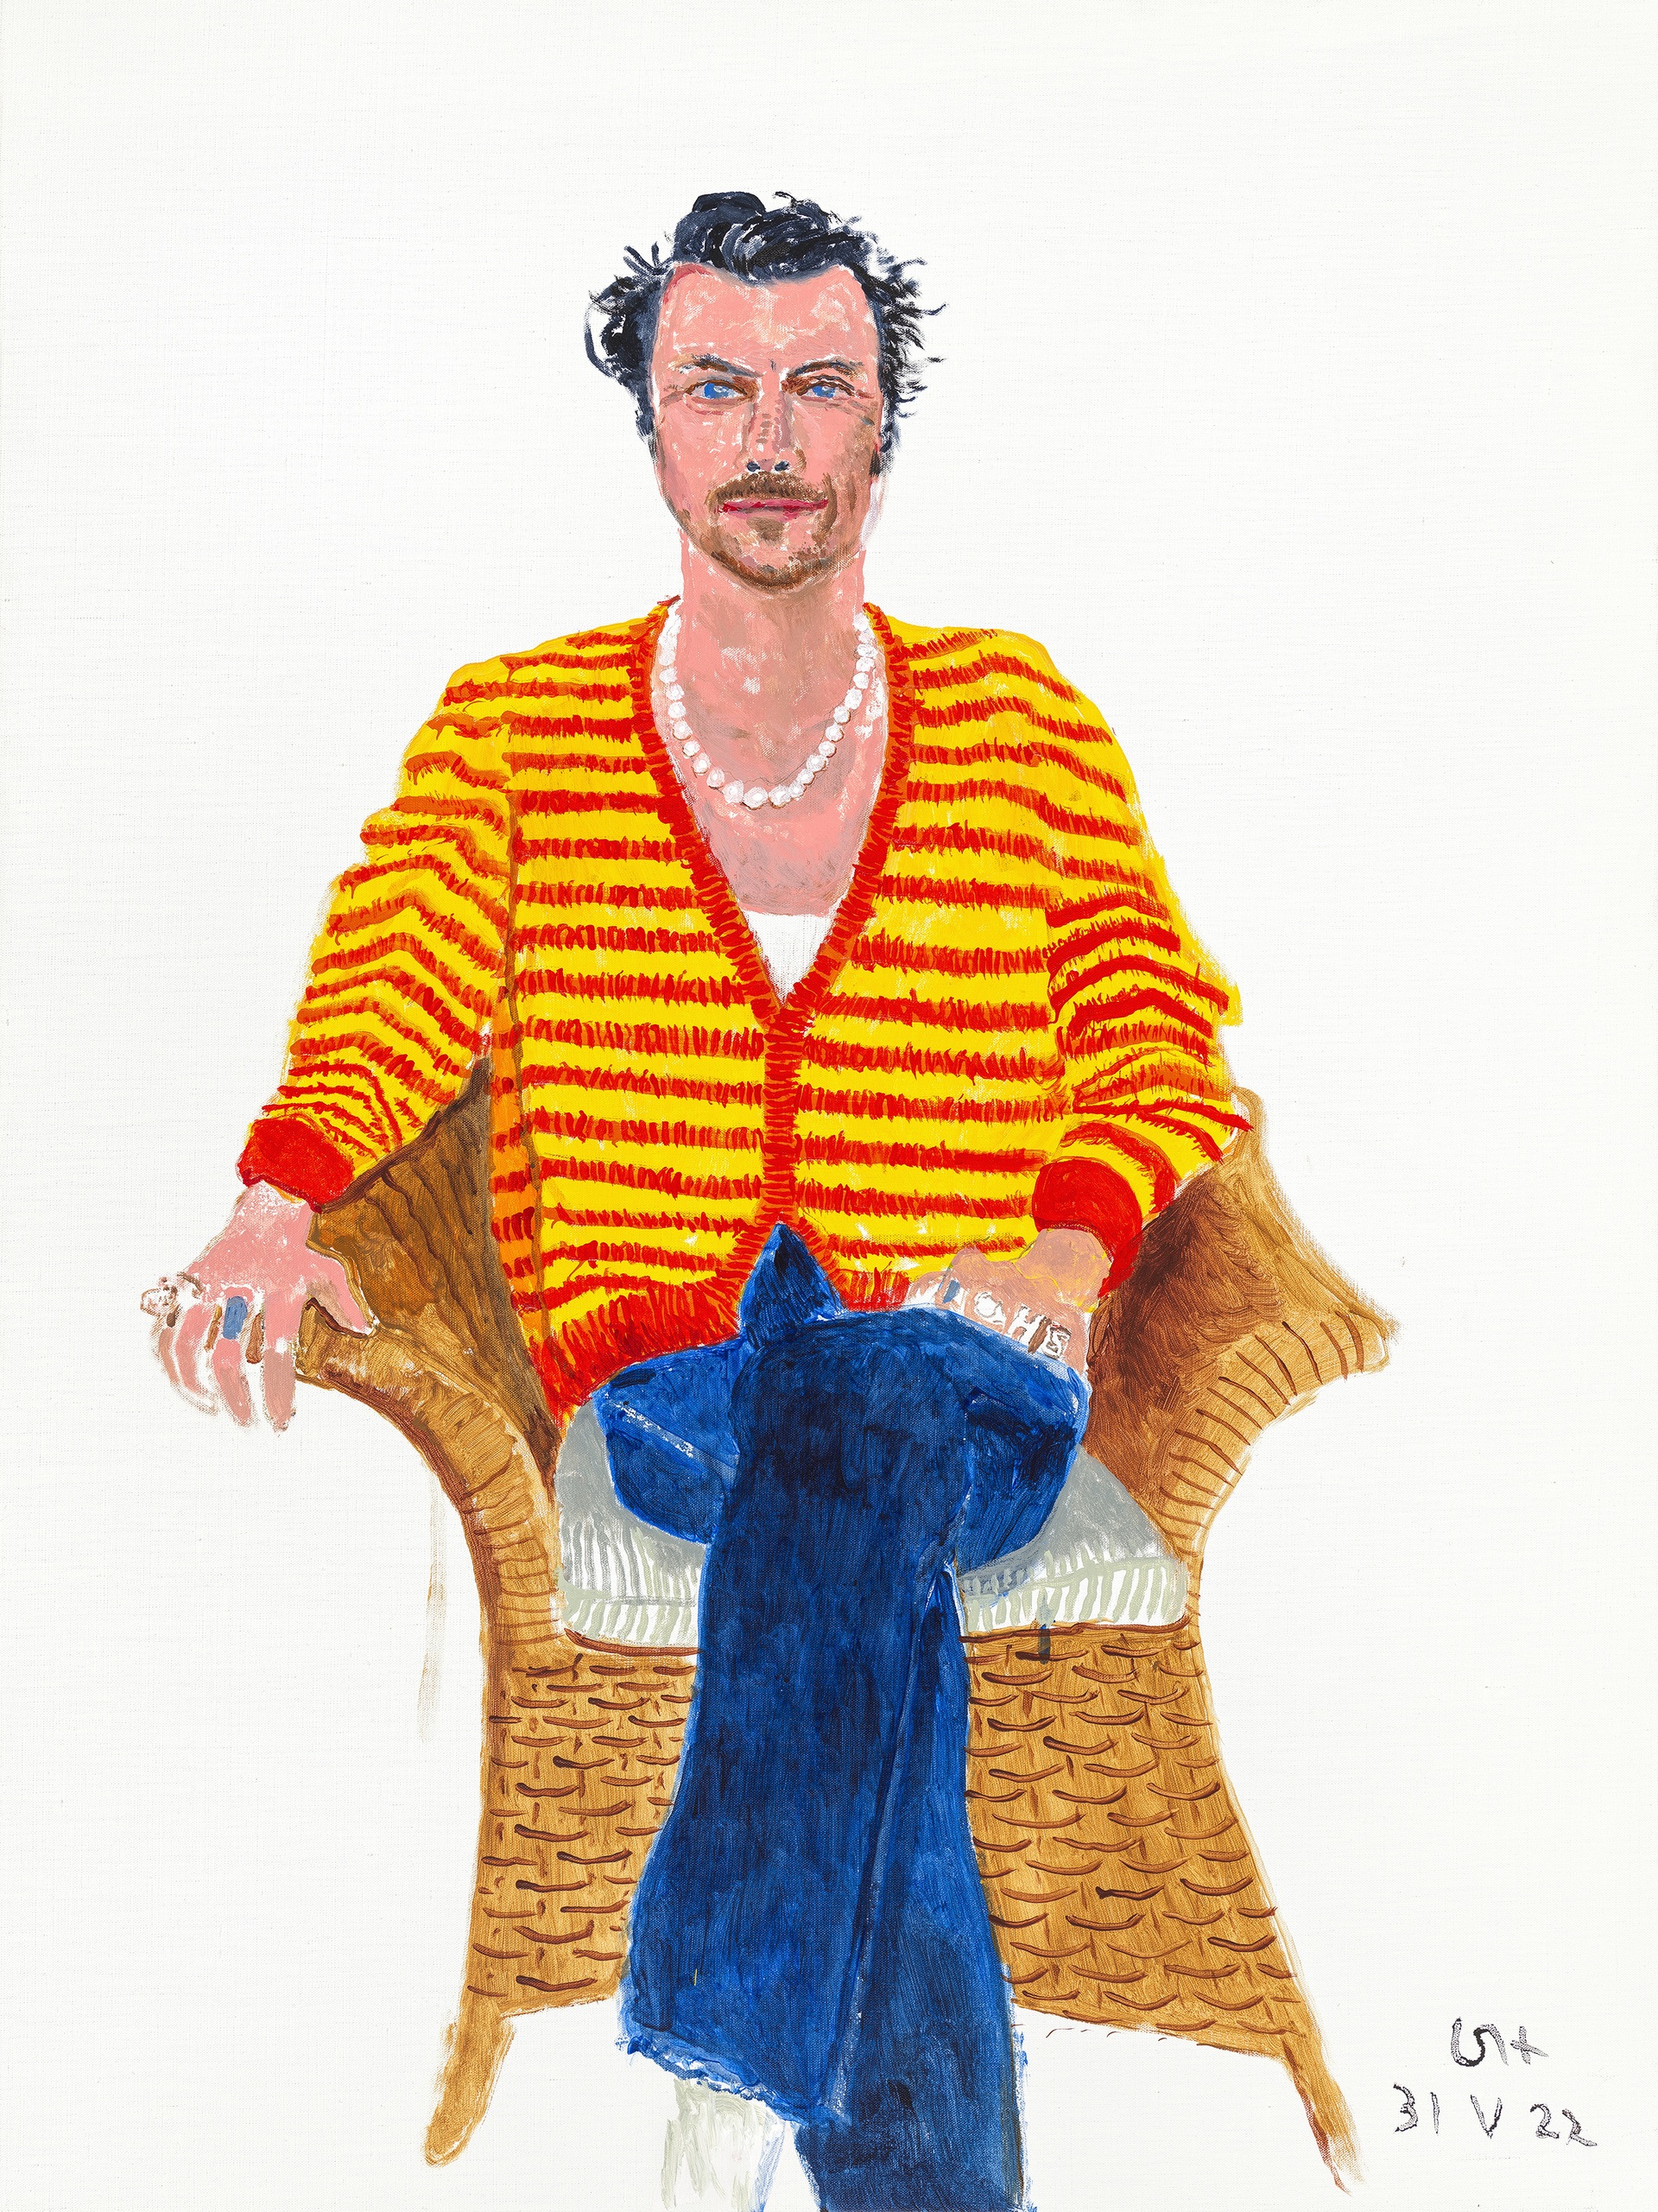 David Hockney's painting of Harry Styles which will go on display as part of David Hockney: Drawing from Life, which opens on November 2 at the National Portrait Gallery in London. 